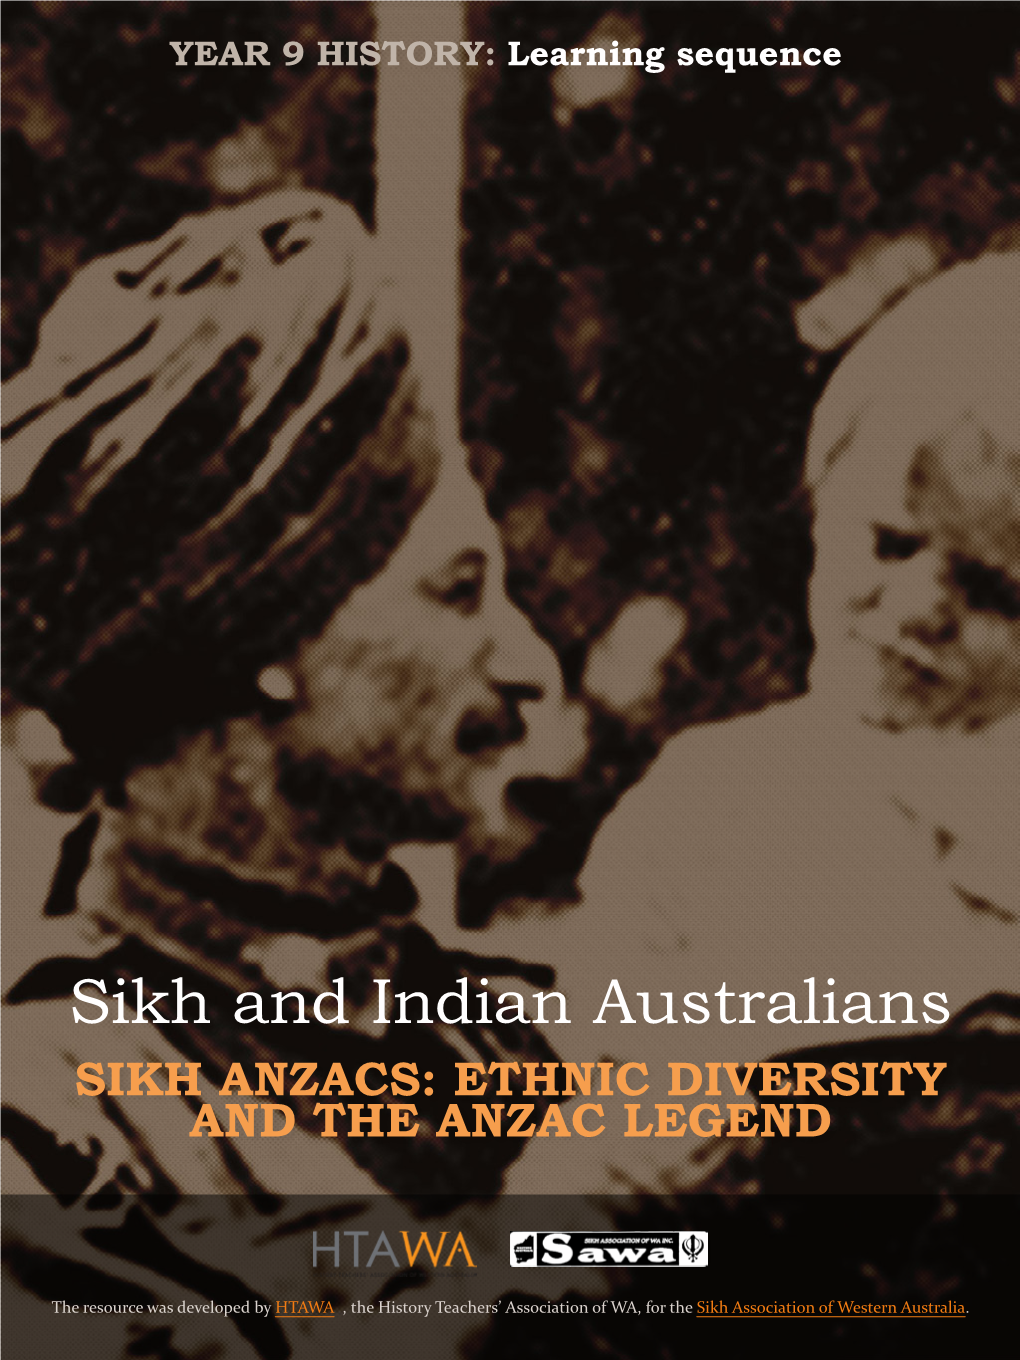 Sikh and Indian Australians SIKH ANZACS: ETHNIC DIVERSITY and the ANZAC LEGEND